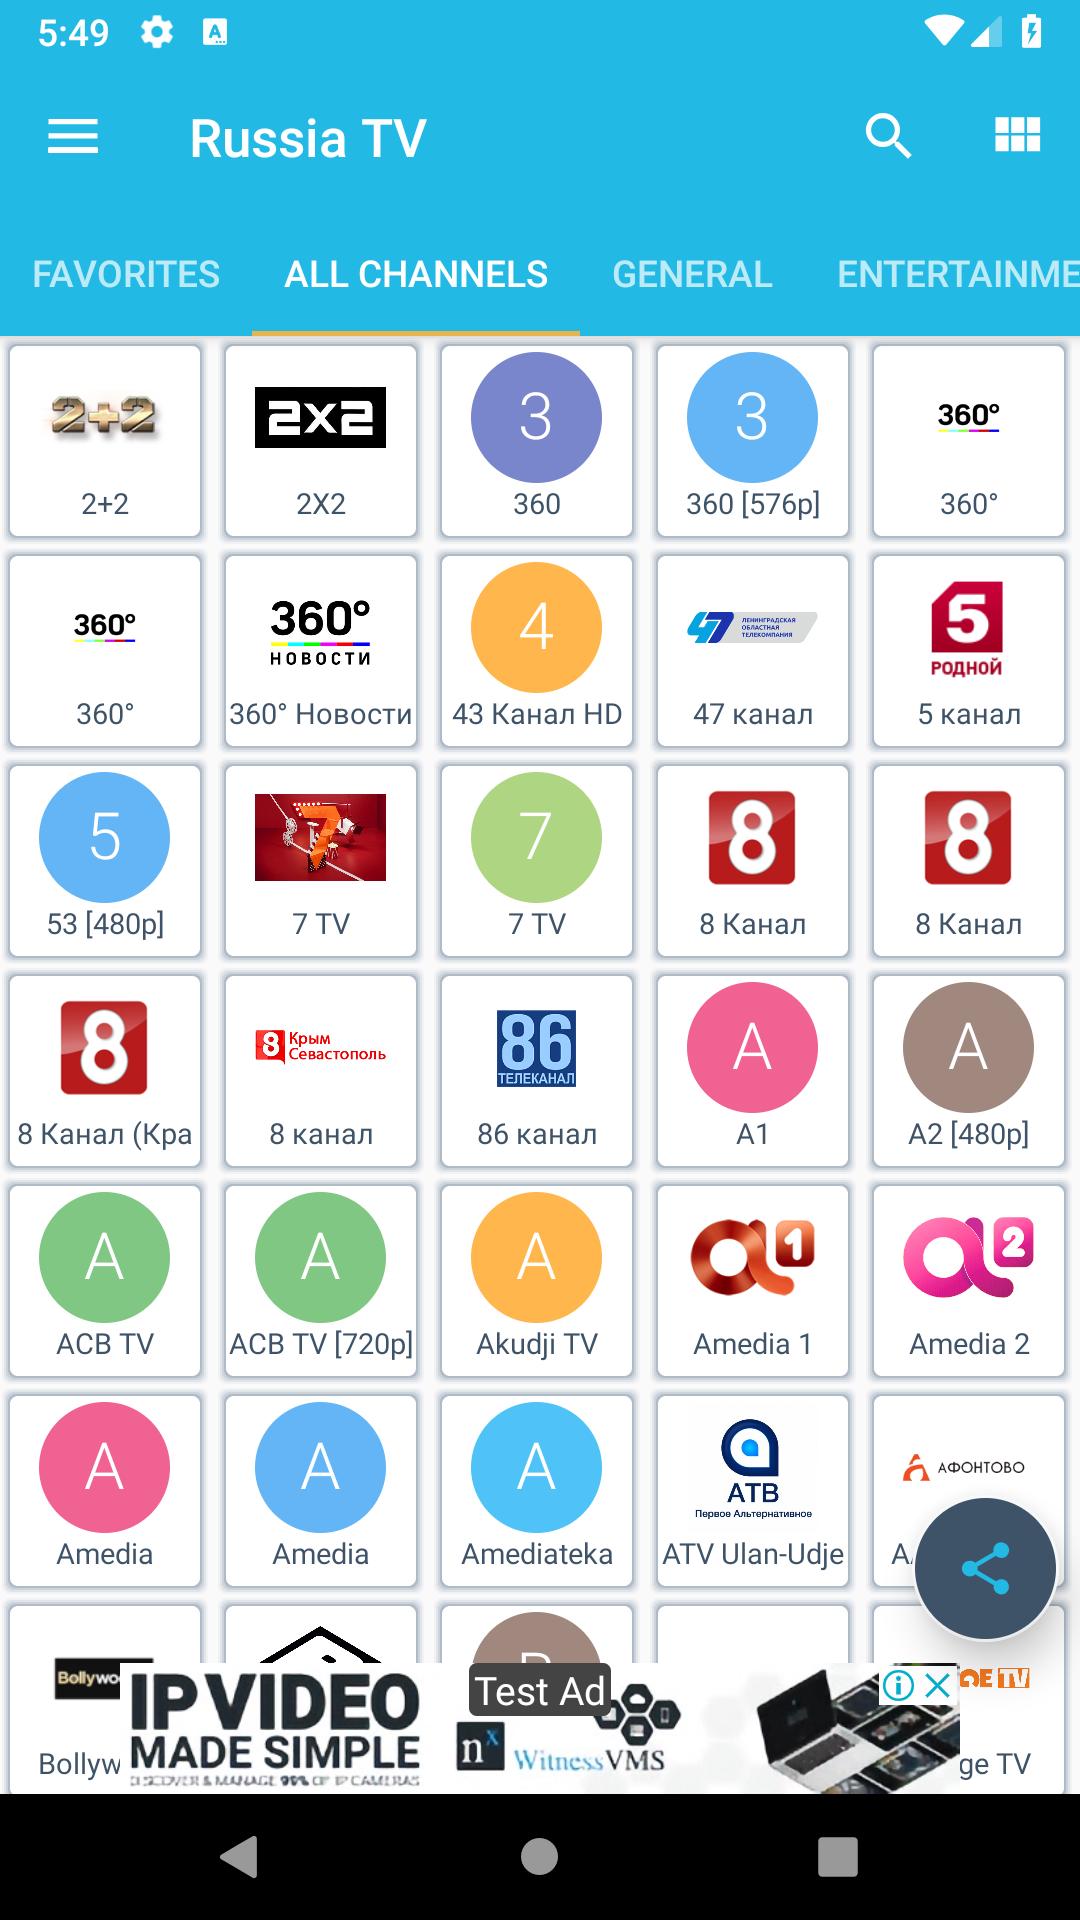 Russia TV - Live Online TV Channels Free for Android - APK Download